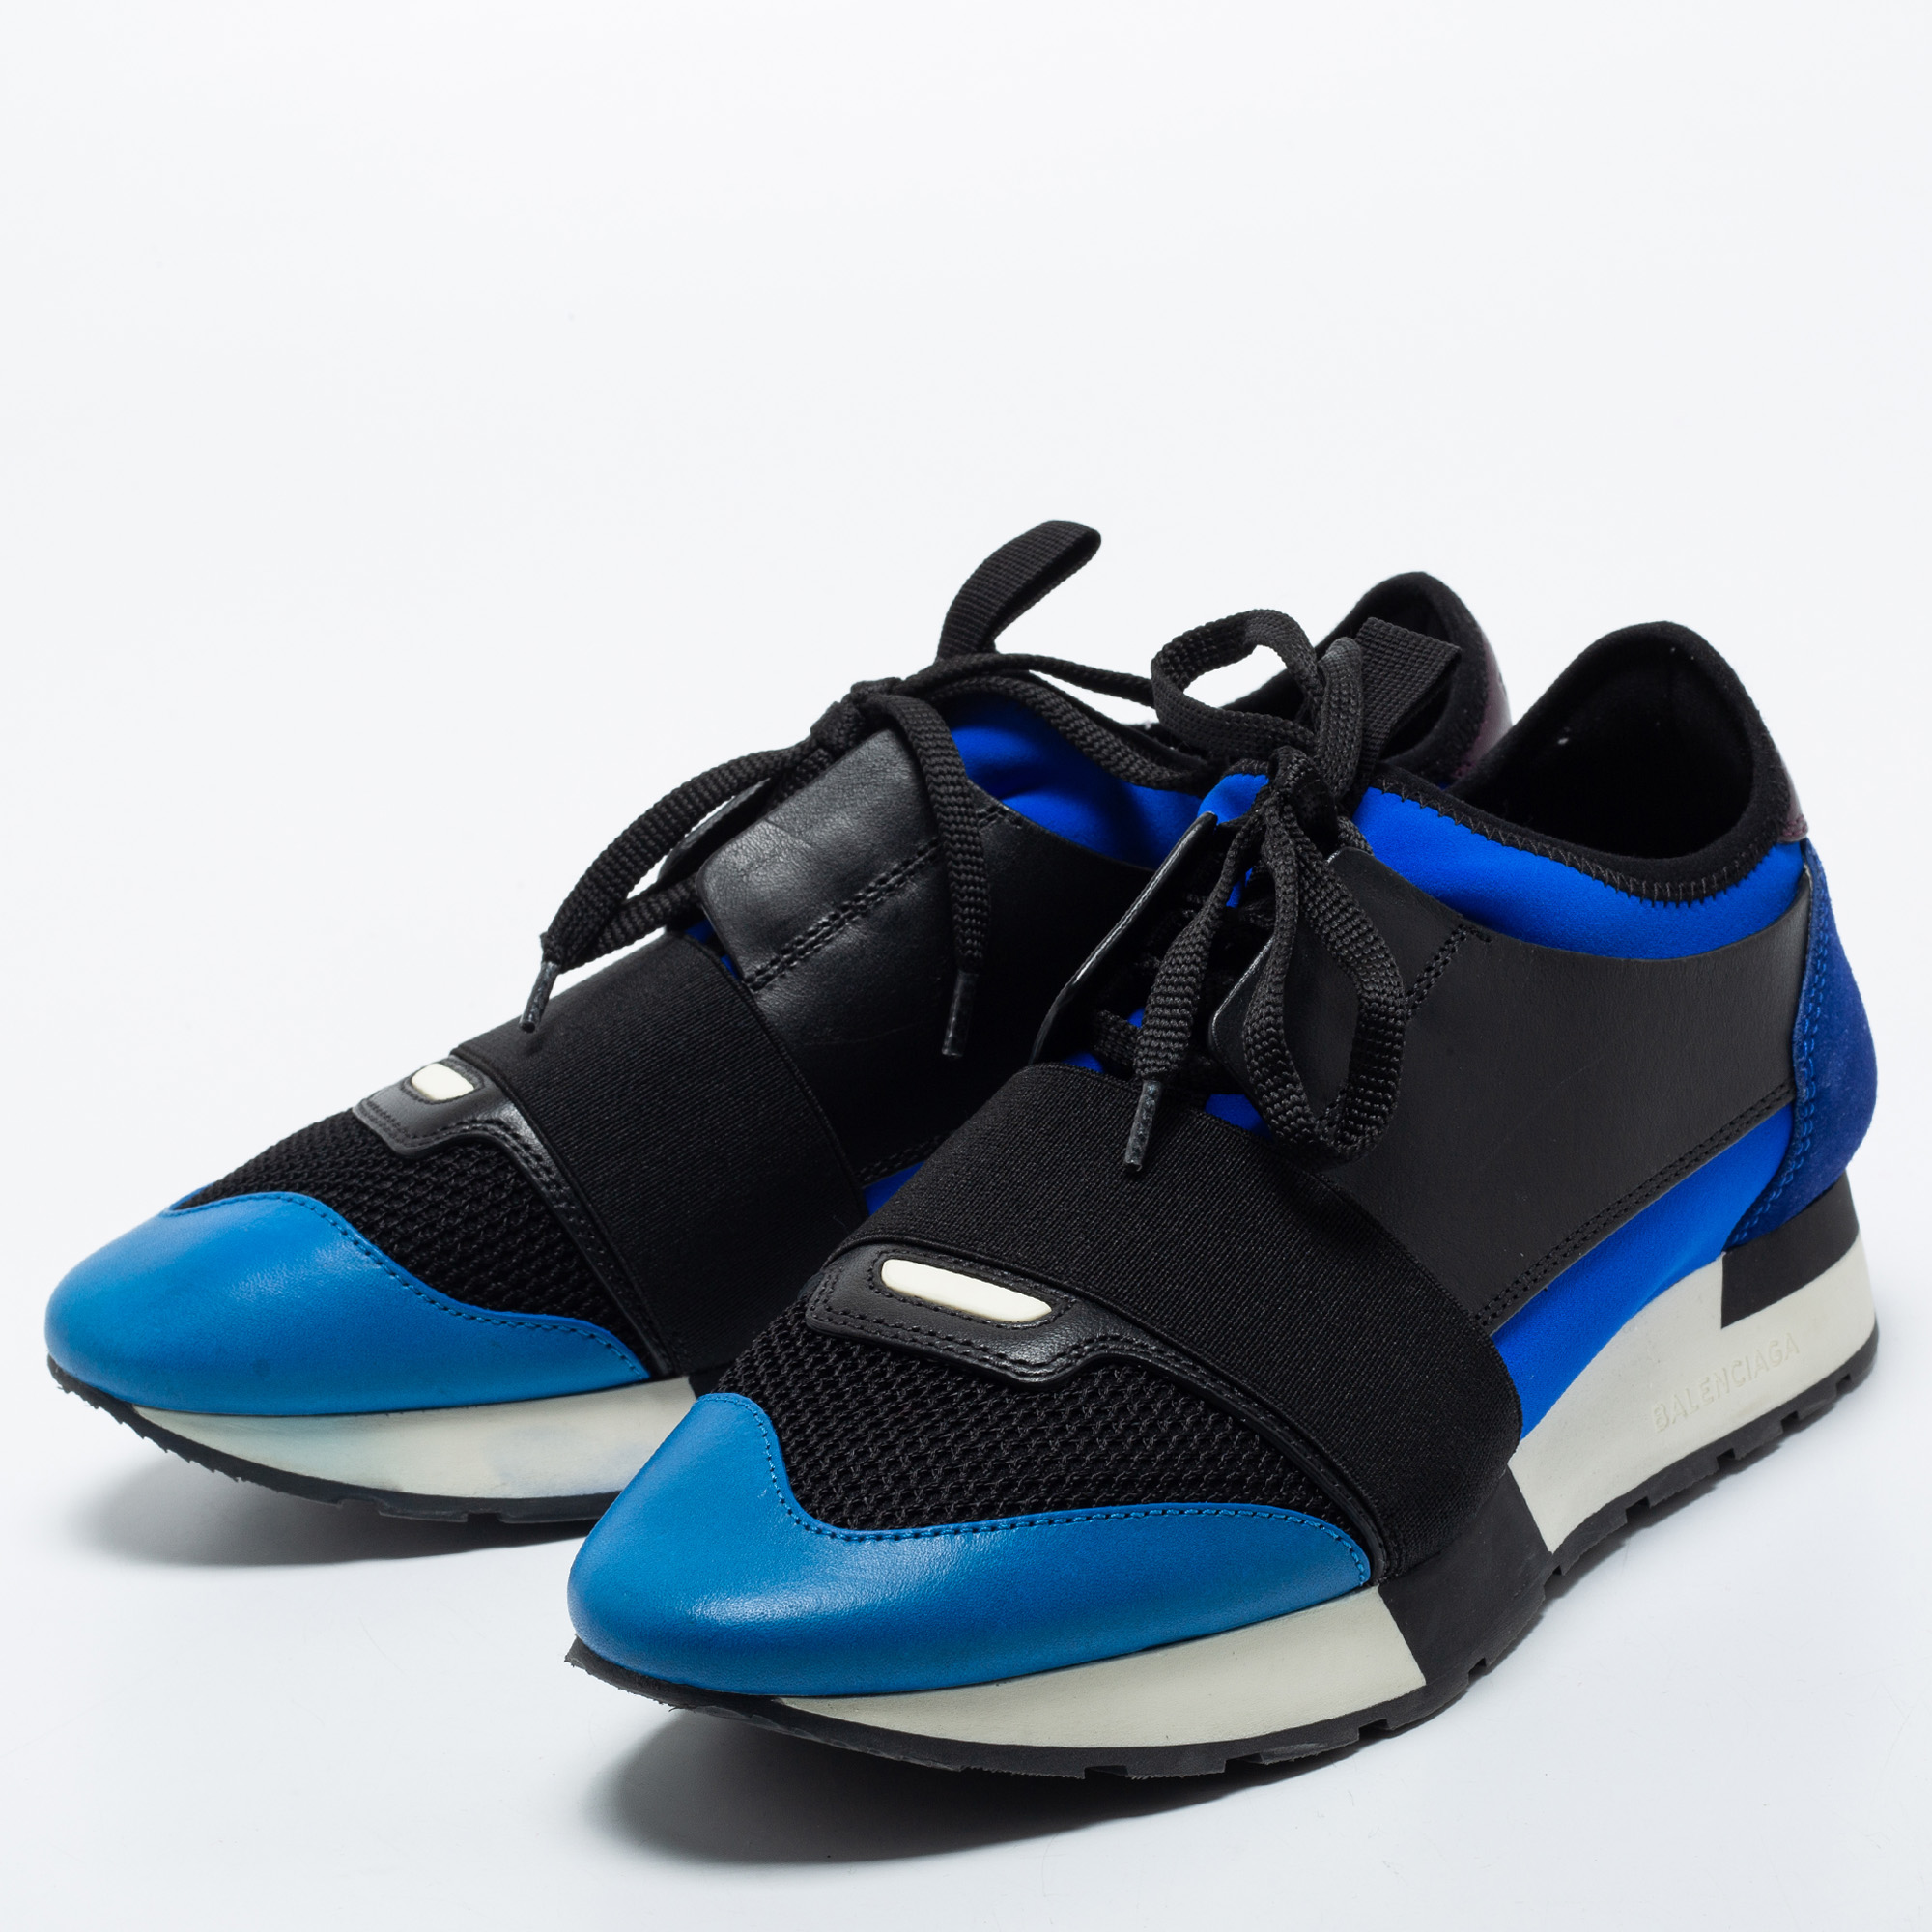 

Balenciaga Blue/Black Leather, Mesh and Neoprene Race Runner Sneakers Size